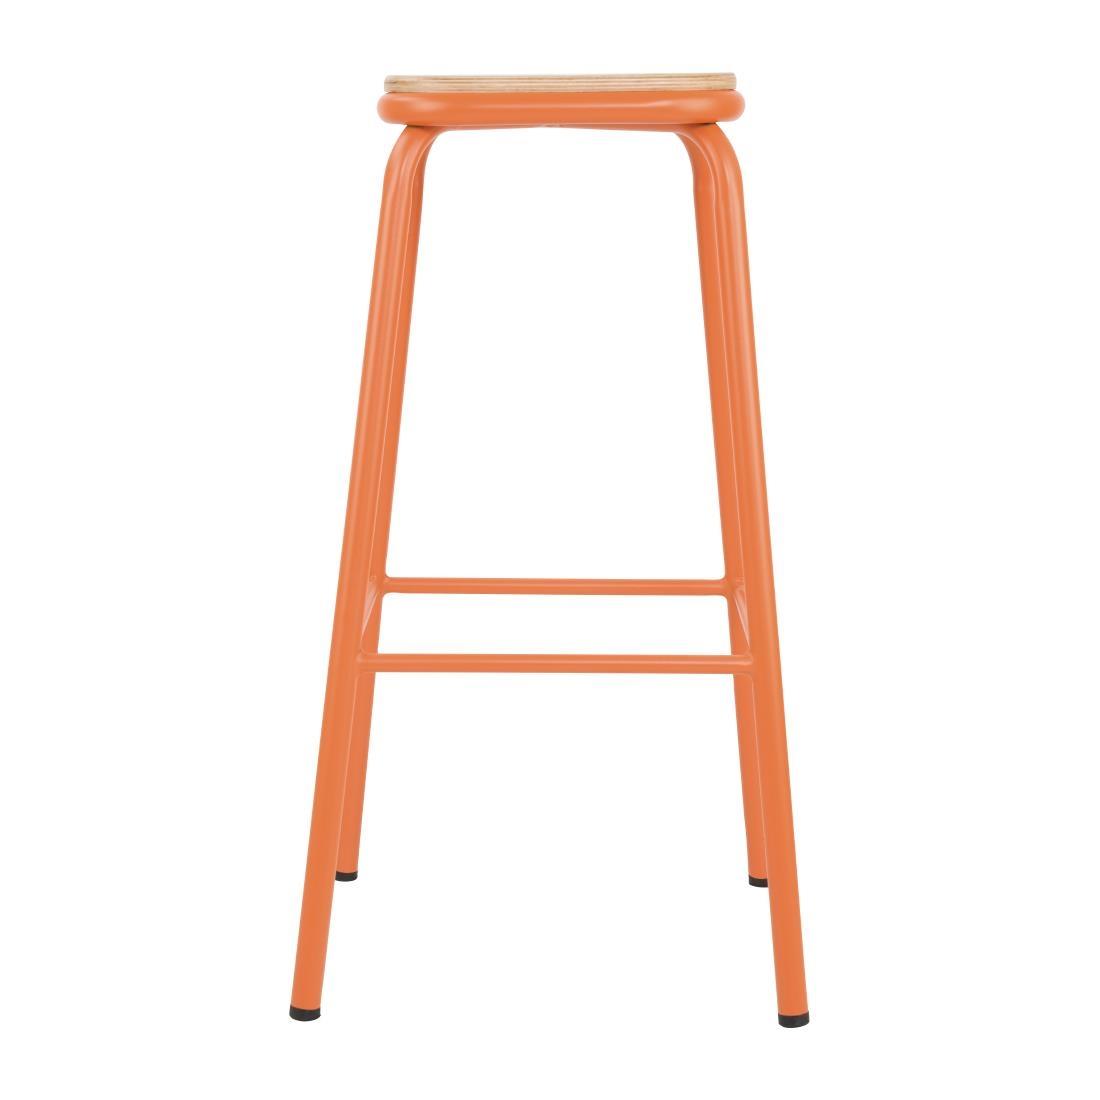 Bolero Cantina High Stools with Wooden Seat Pad Orange (Pack of 4) - FB940  - 2